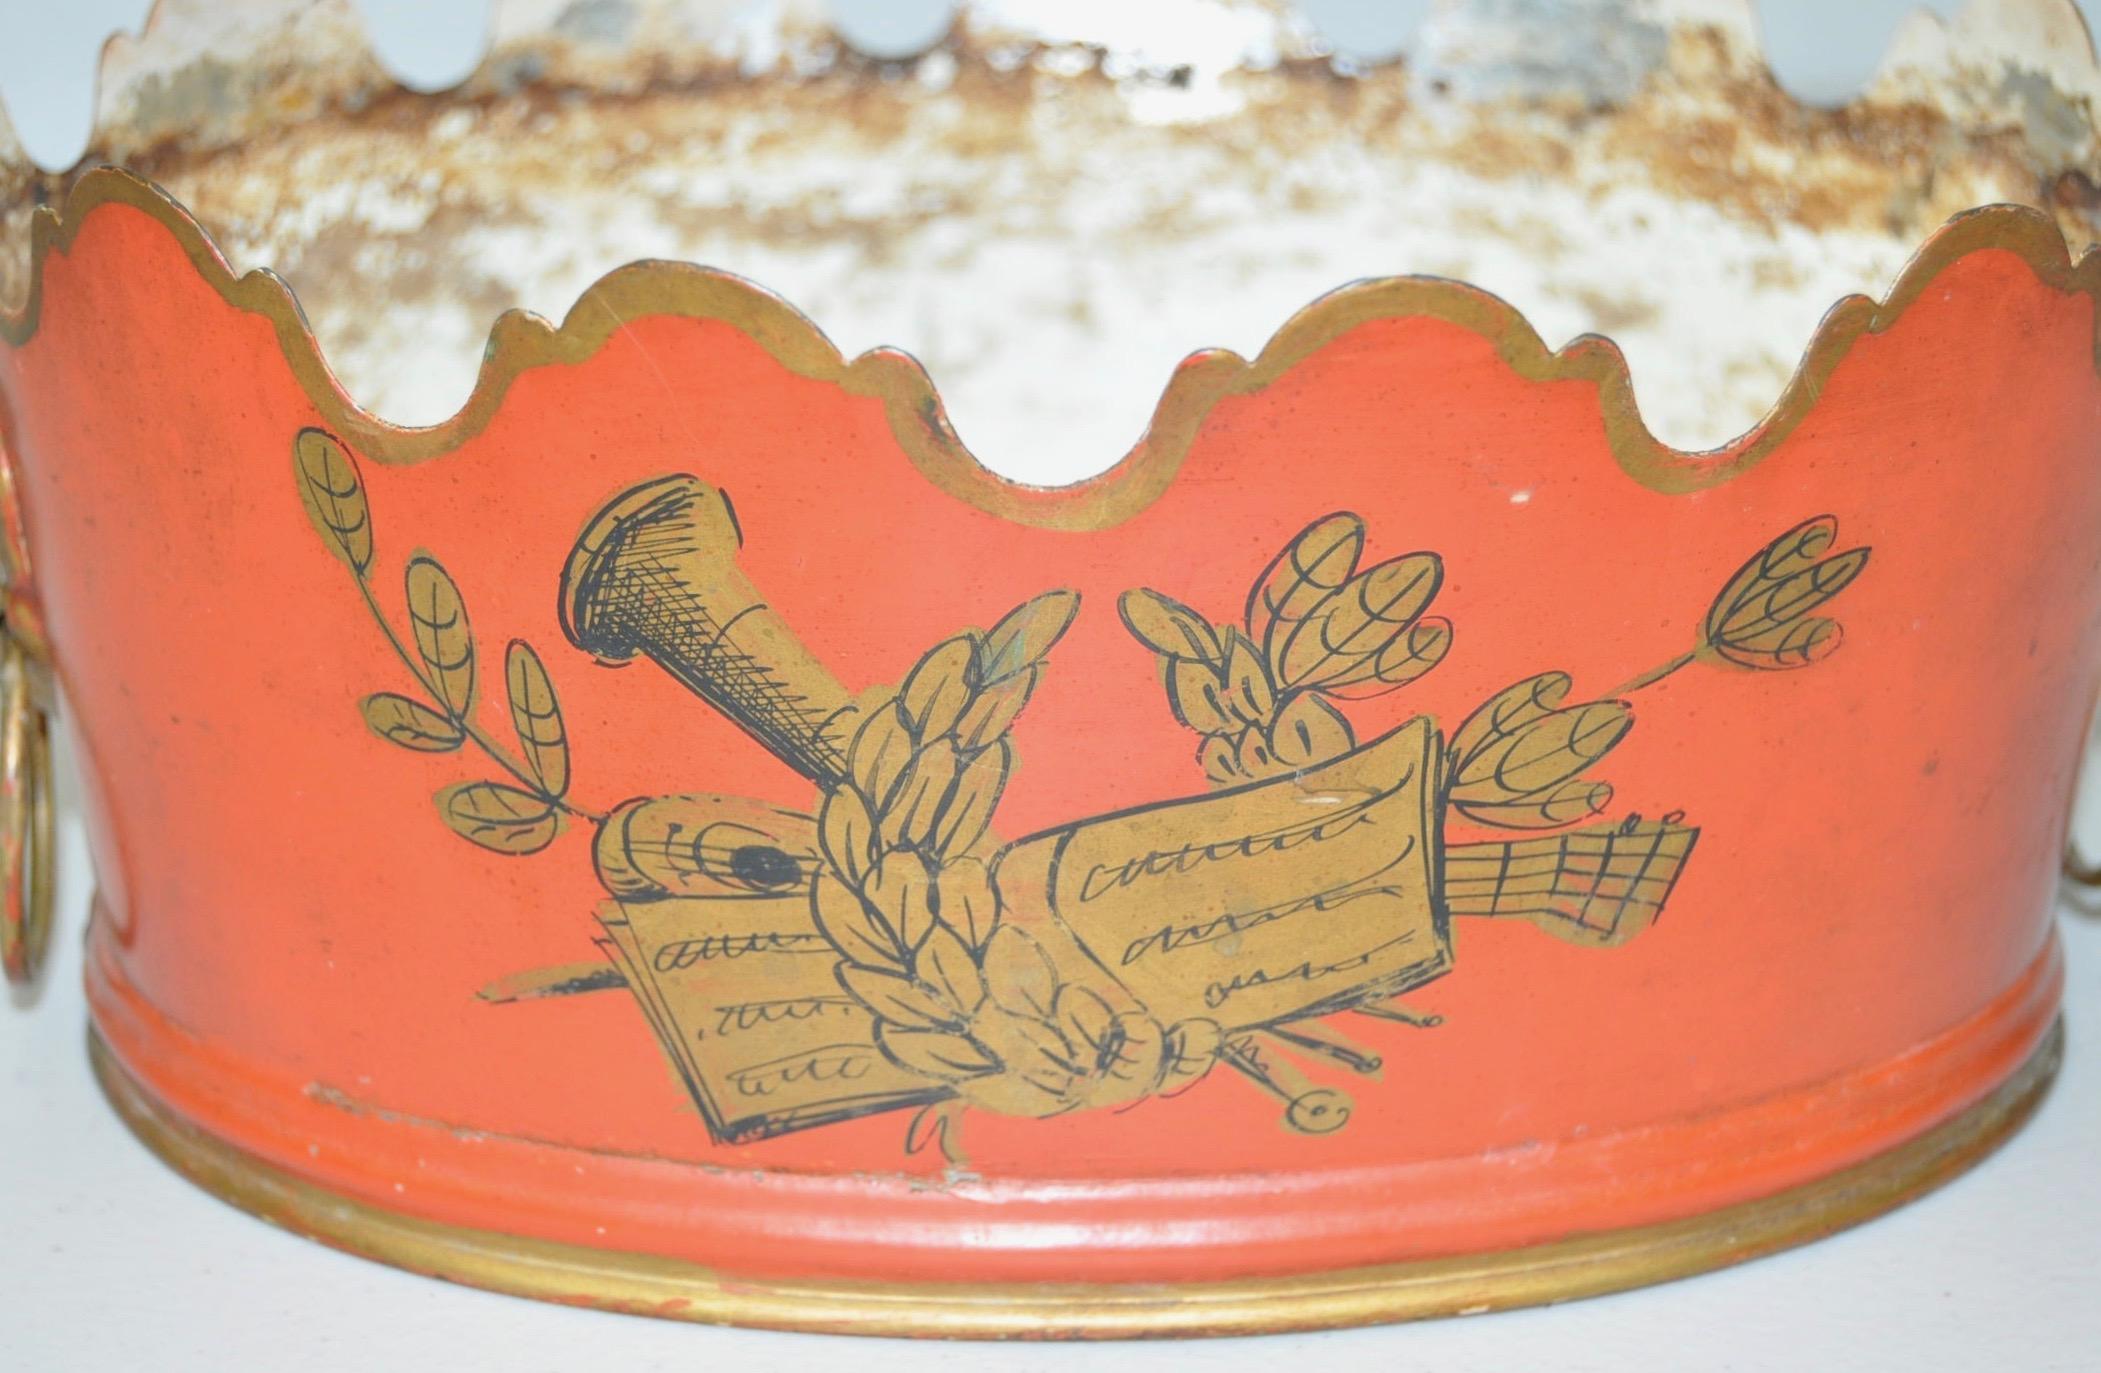 Lovely 19th century French Toleware Vierriere

Scalloped border with a crimson body accented with a musical themed gilt medallion, and lion head handles.

Dimensions 9 1/2